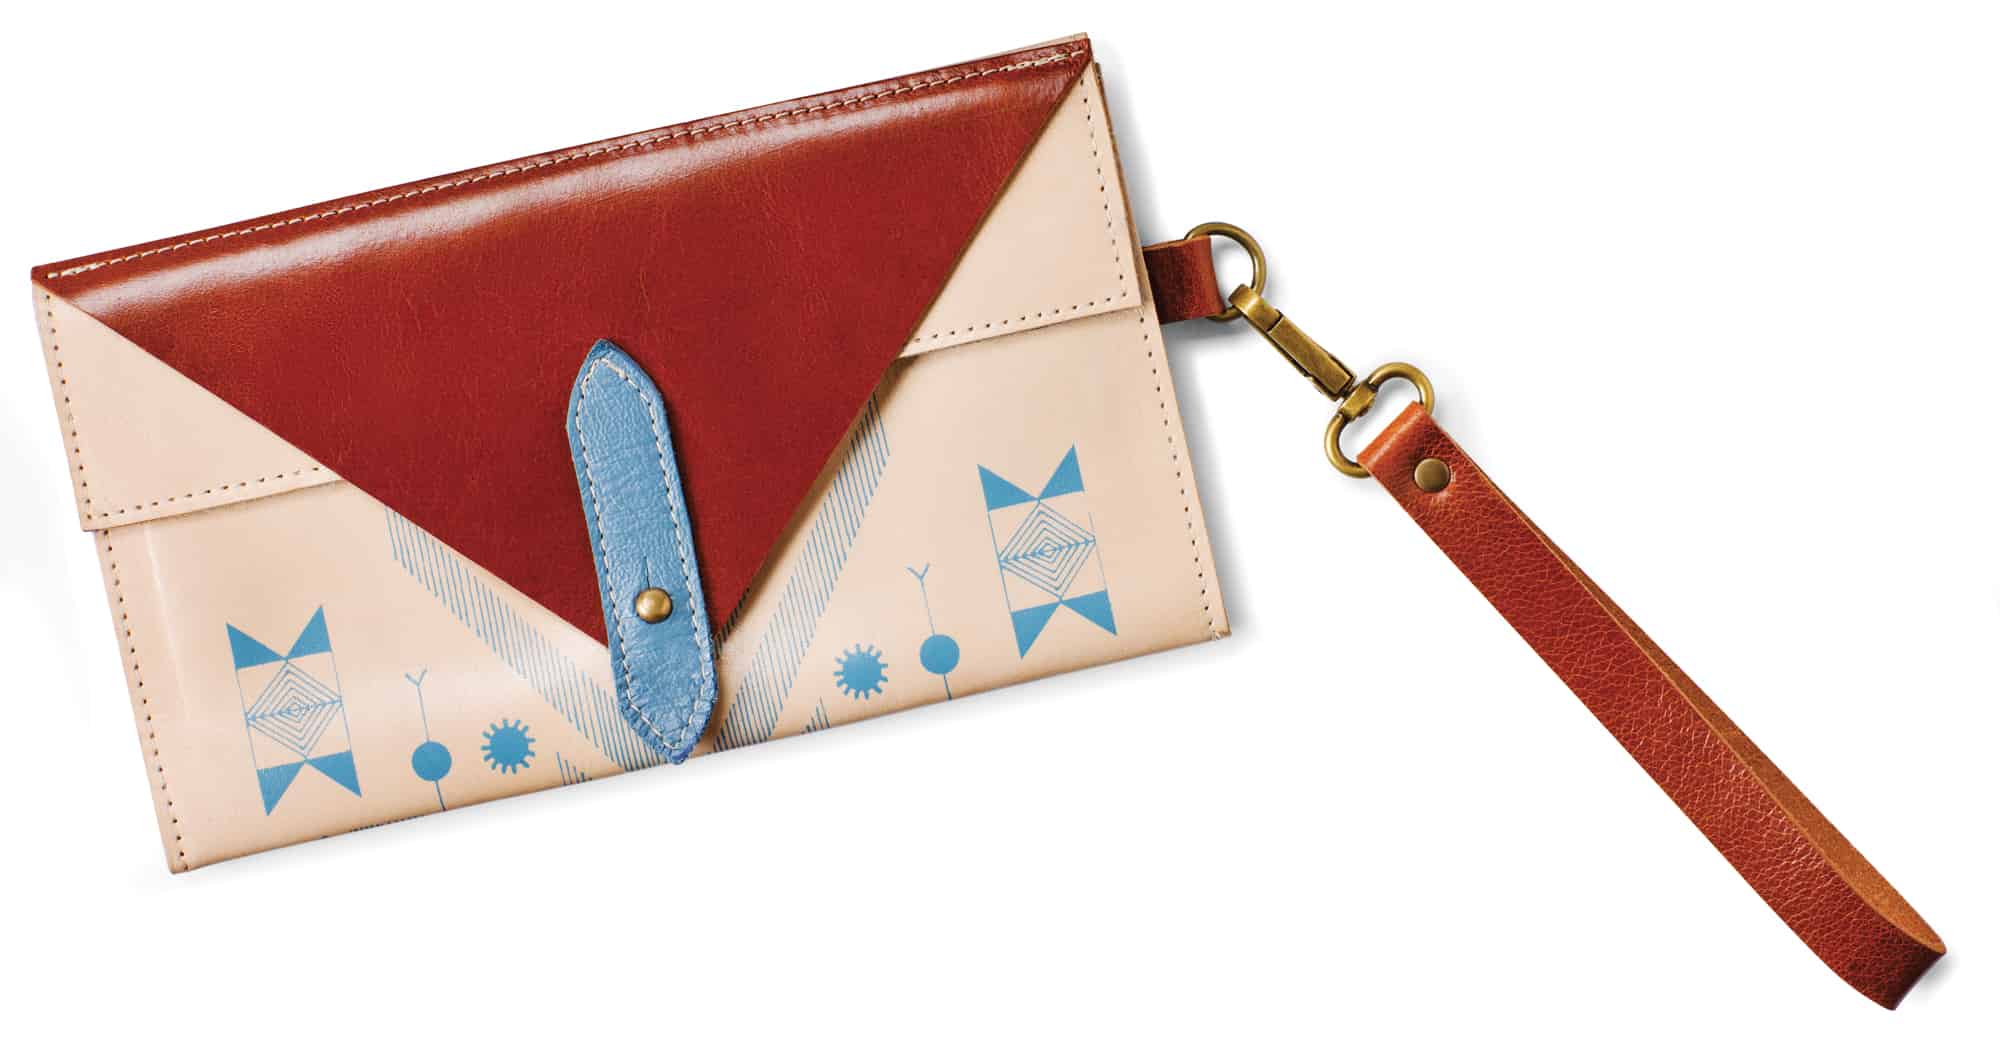 Wallet $105 by Catherine Cournoyer and Jinny Lévesque